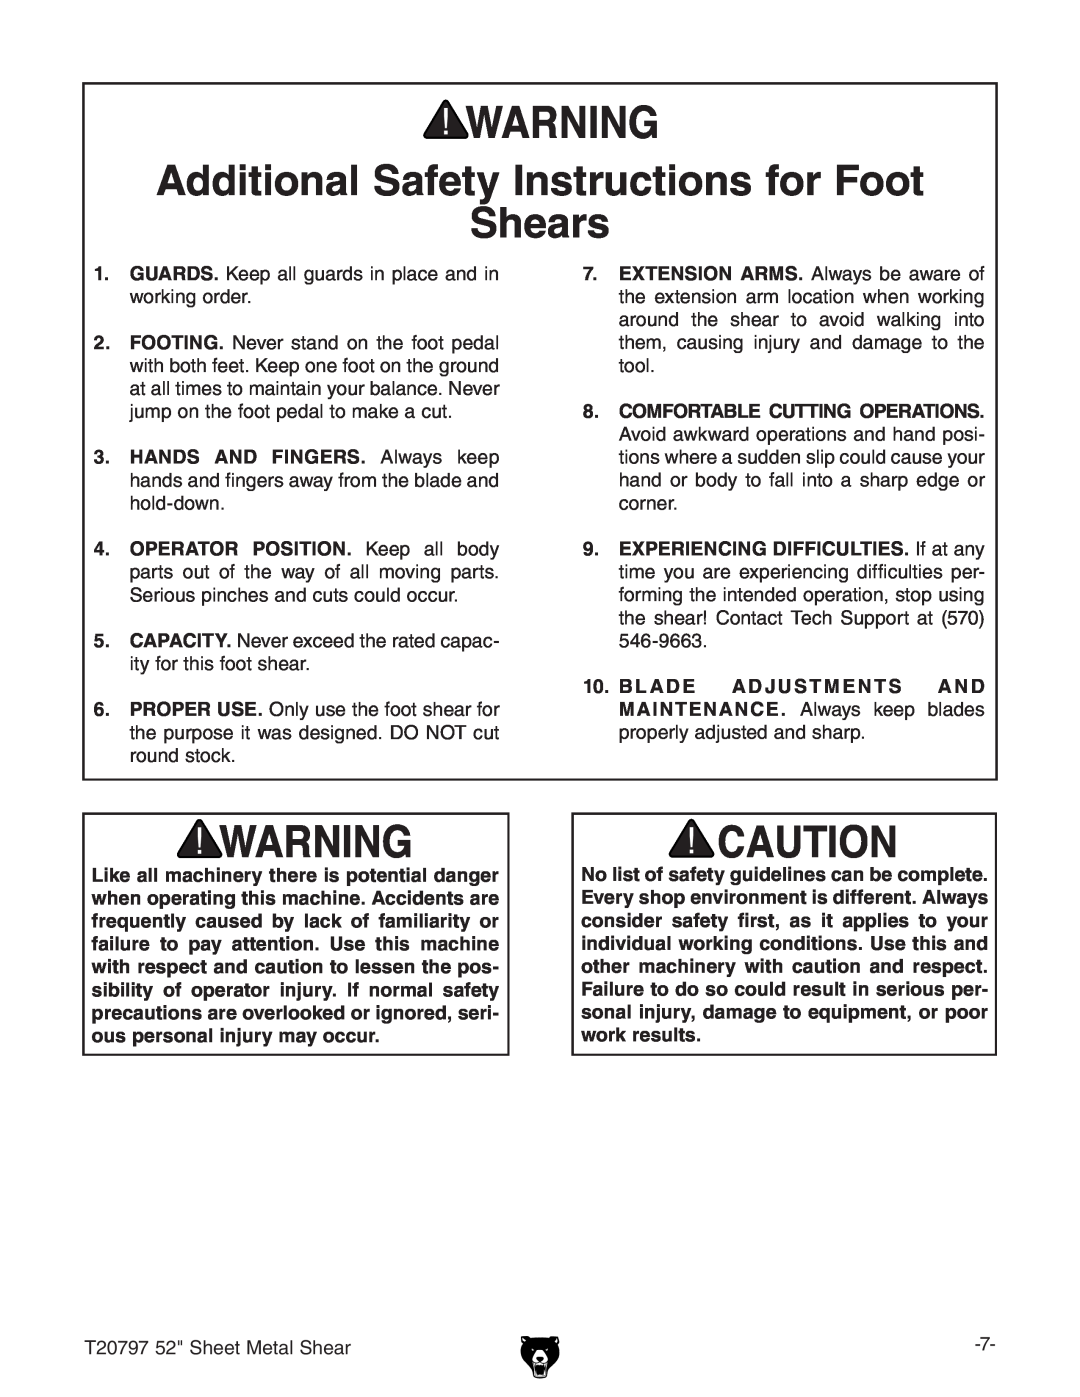 Grizzly T20797 owner manual Additional Safety Instructions for Foot Shears, I%,.,*HZZiBZiVaHZVg 